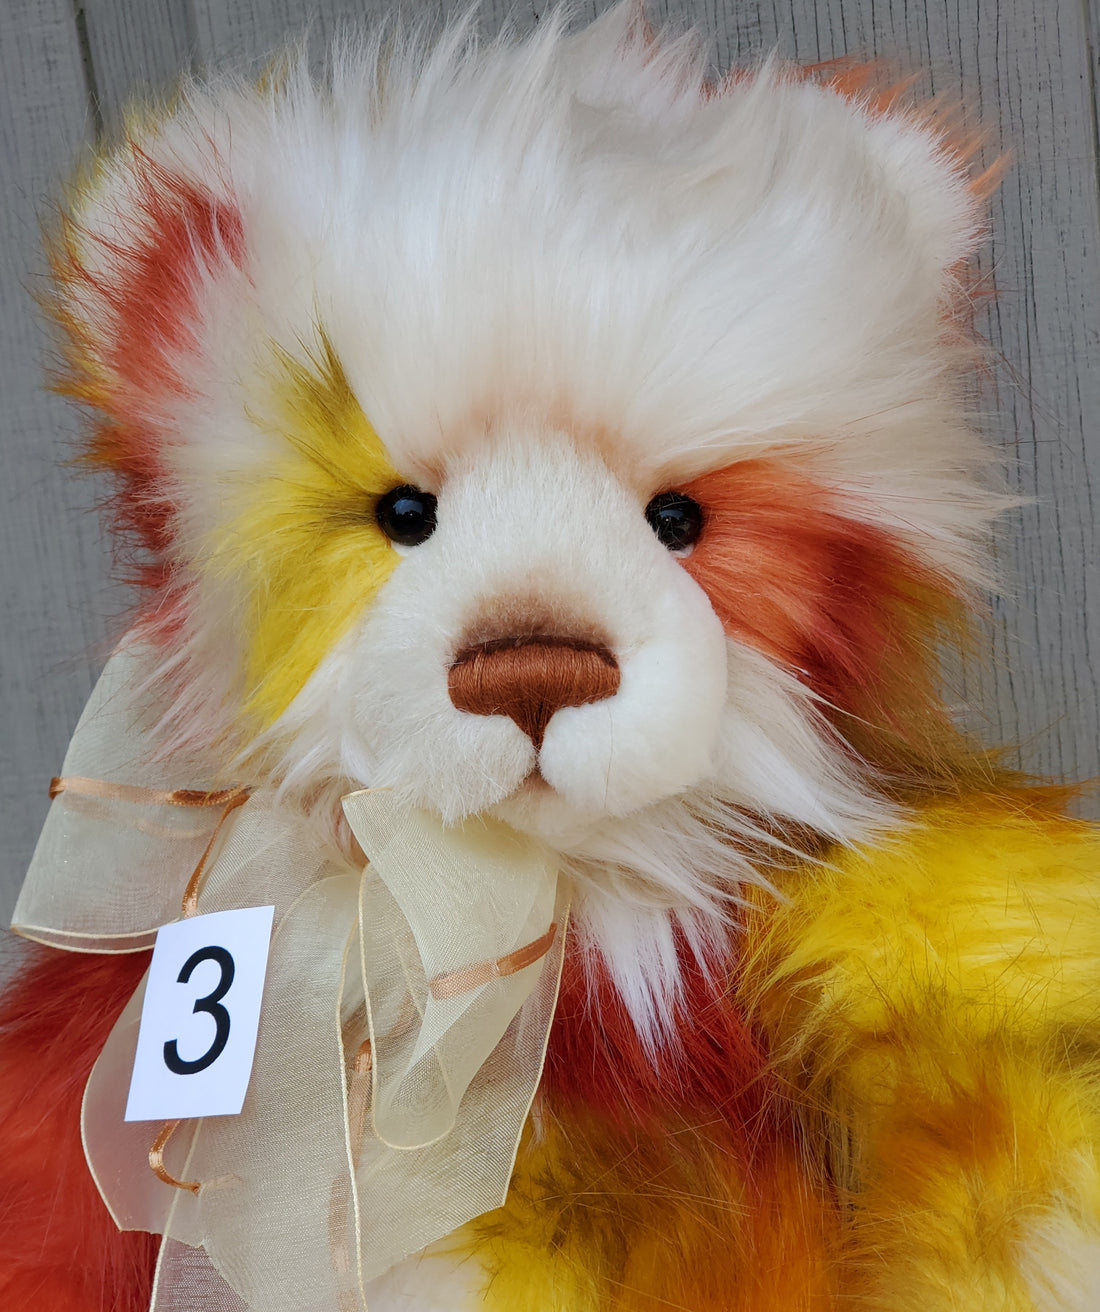 Carnival - 19" Bright Plush from Charlie Bears